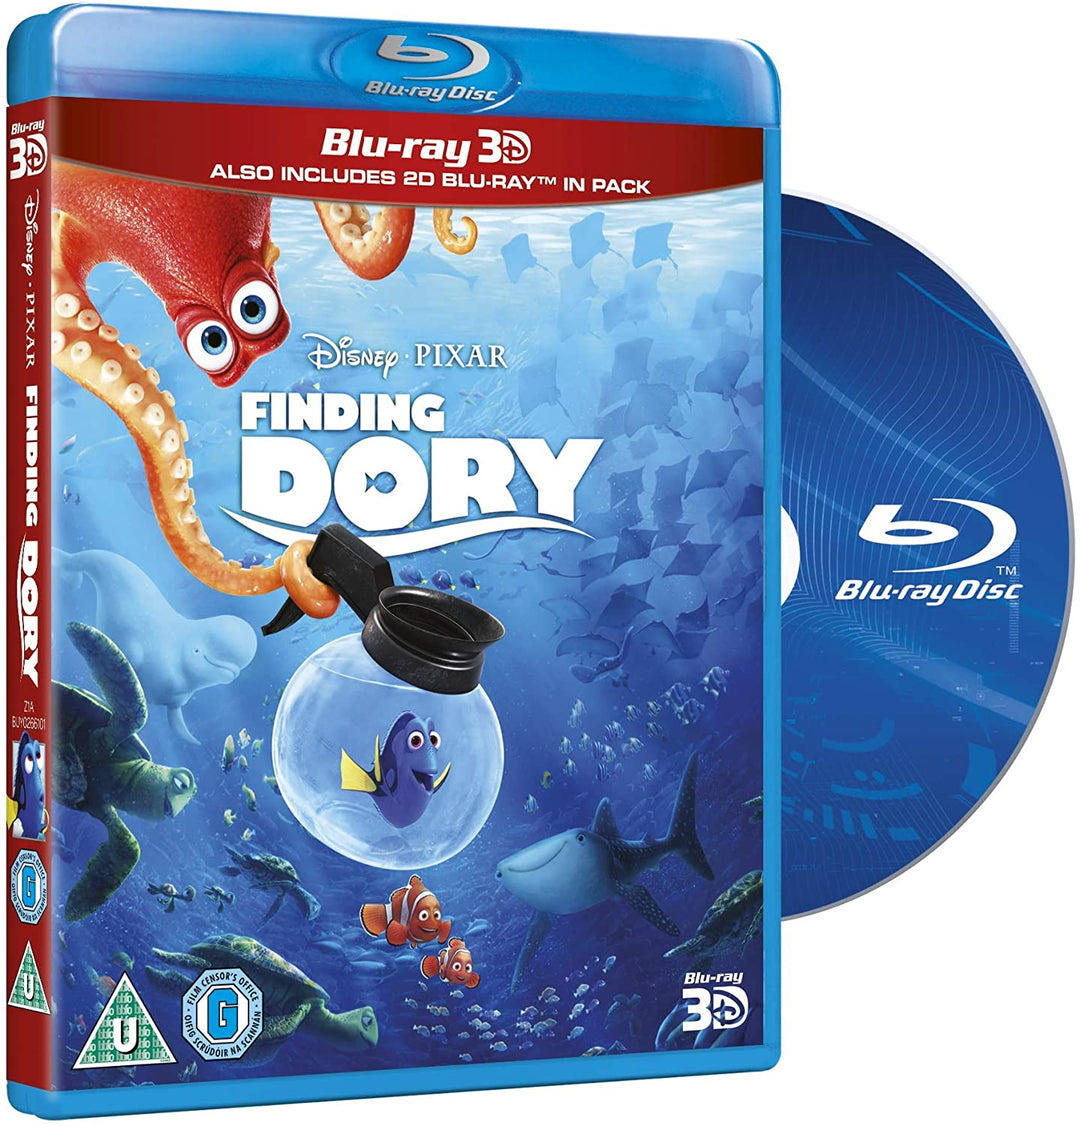 Trouver Dory [Blu-ray 3D] [2017]